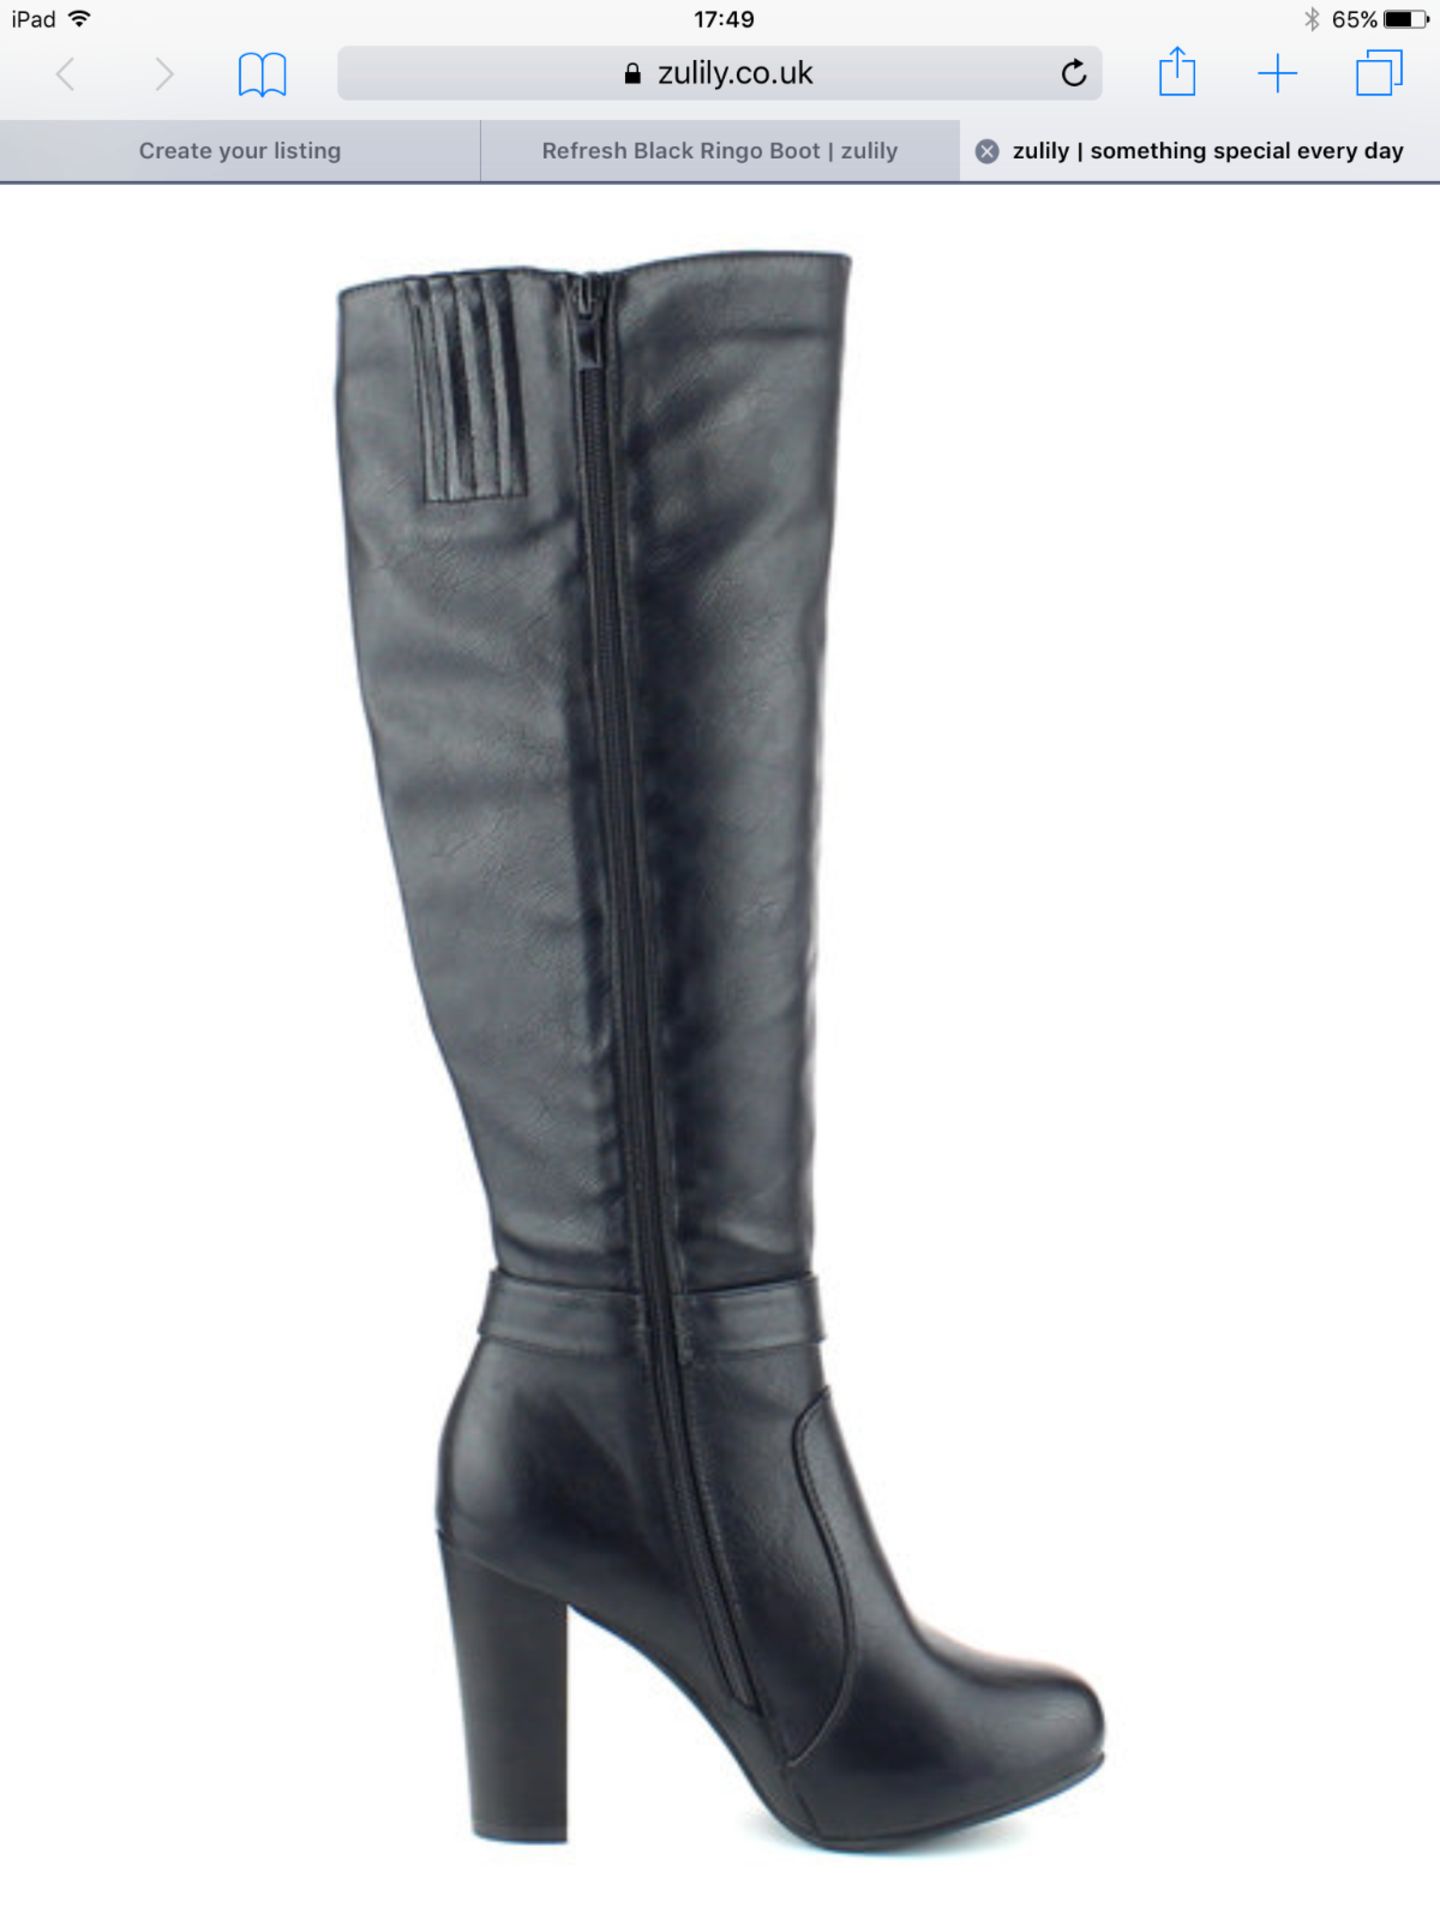 Refresh Black Ringo Boot, Size Eur 40 (New with box) [Ref: 31414984- H-002] - Image 2 of 7